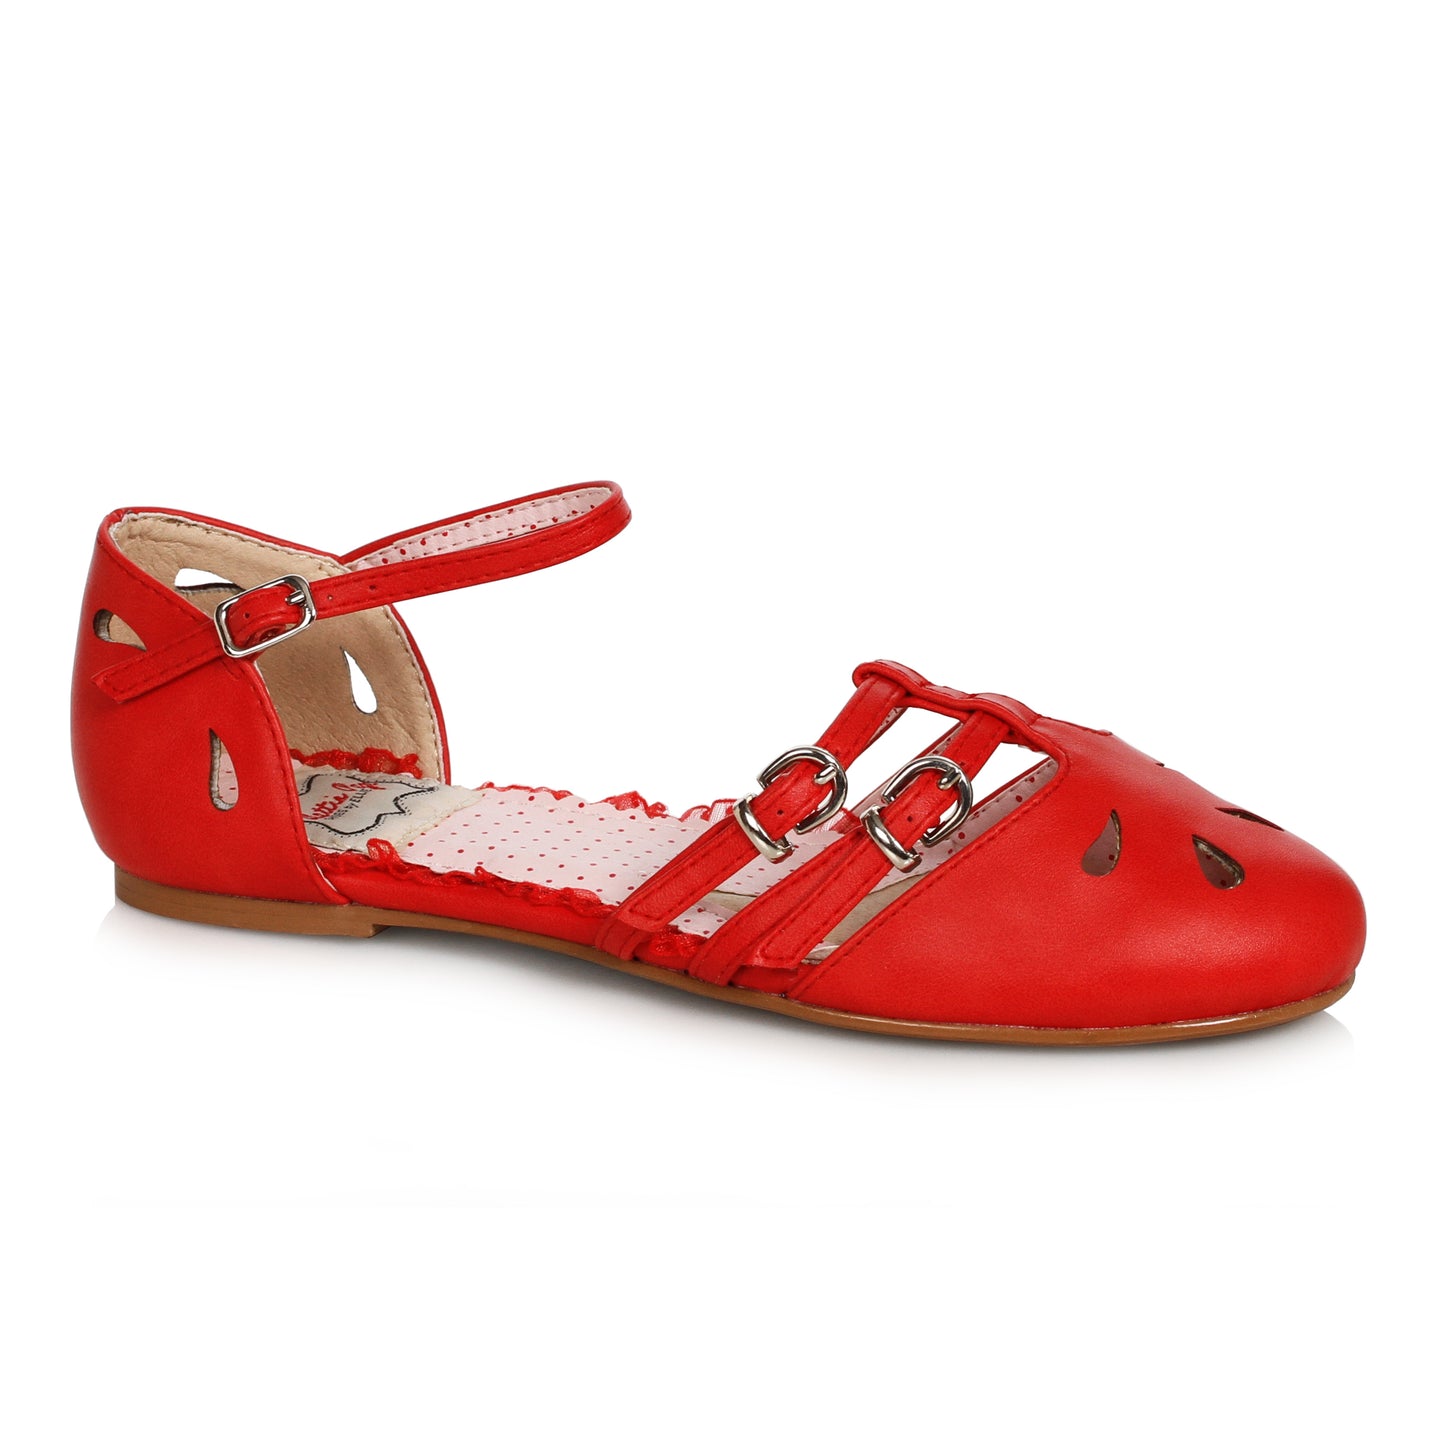 BP100-POLLY Bettie Page Closed Toe Flat with Cutout Décor & Buckle Closure FLATS